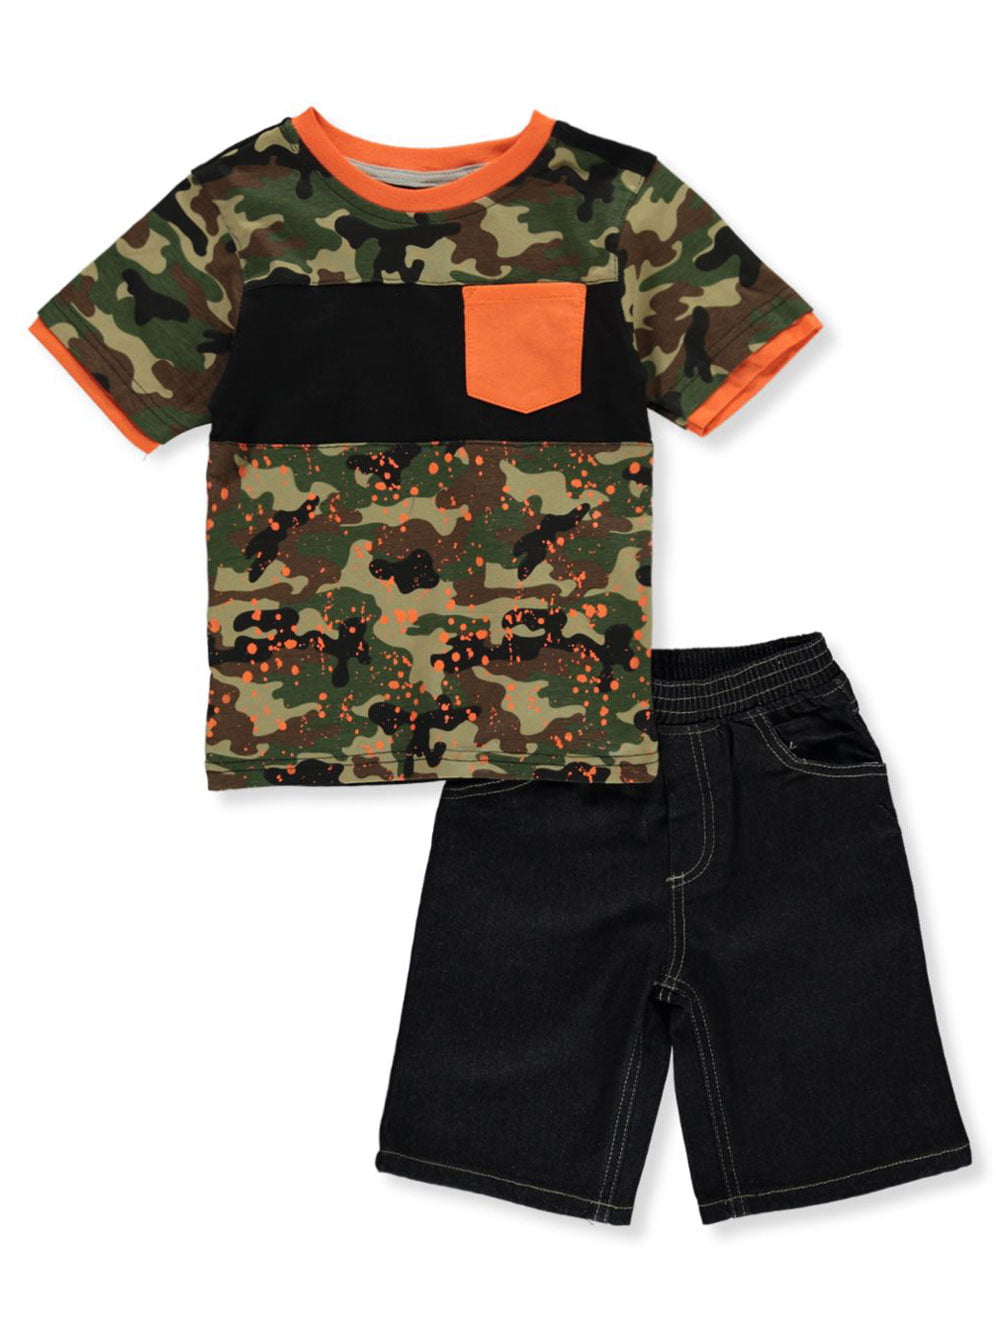 Boys T-Shirts & Shorts Set Army Military Camouflage Kids Clothes Ages 4-14 Years 